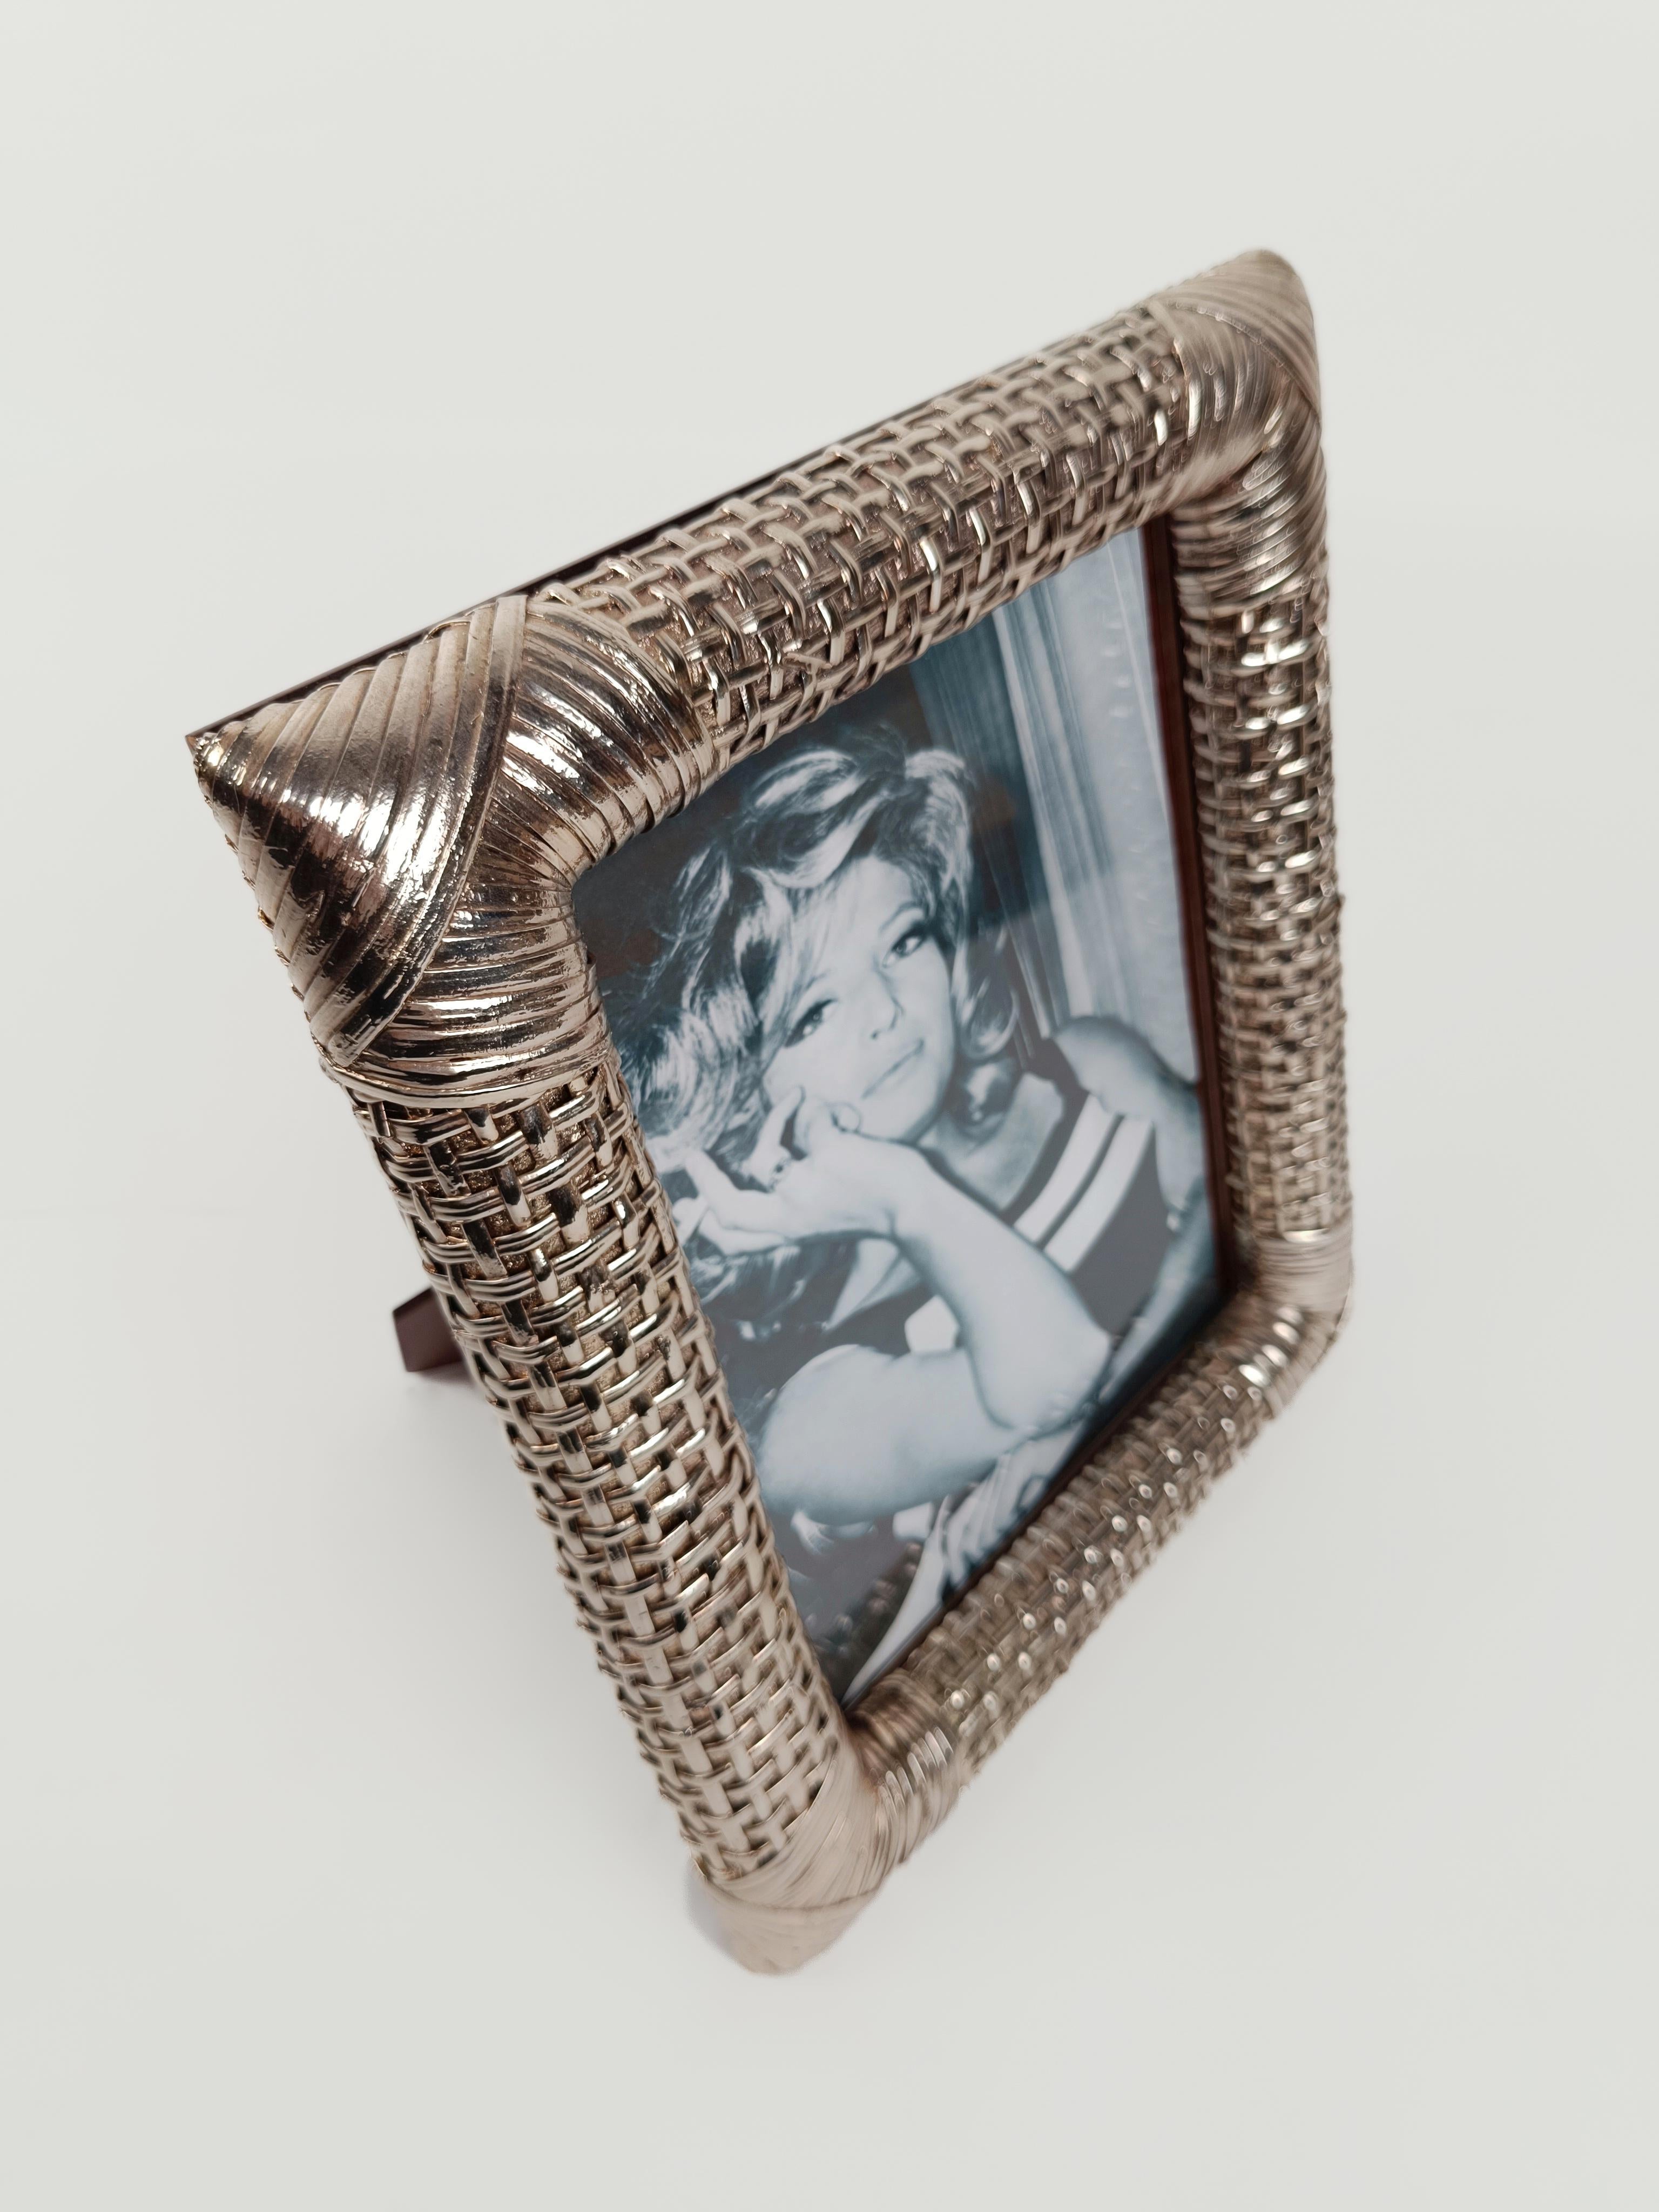 Midcentury Table Picture Frame Made in Silver Plated Woven Wicker, Italy 1970s For Sale 13